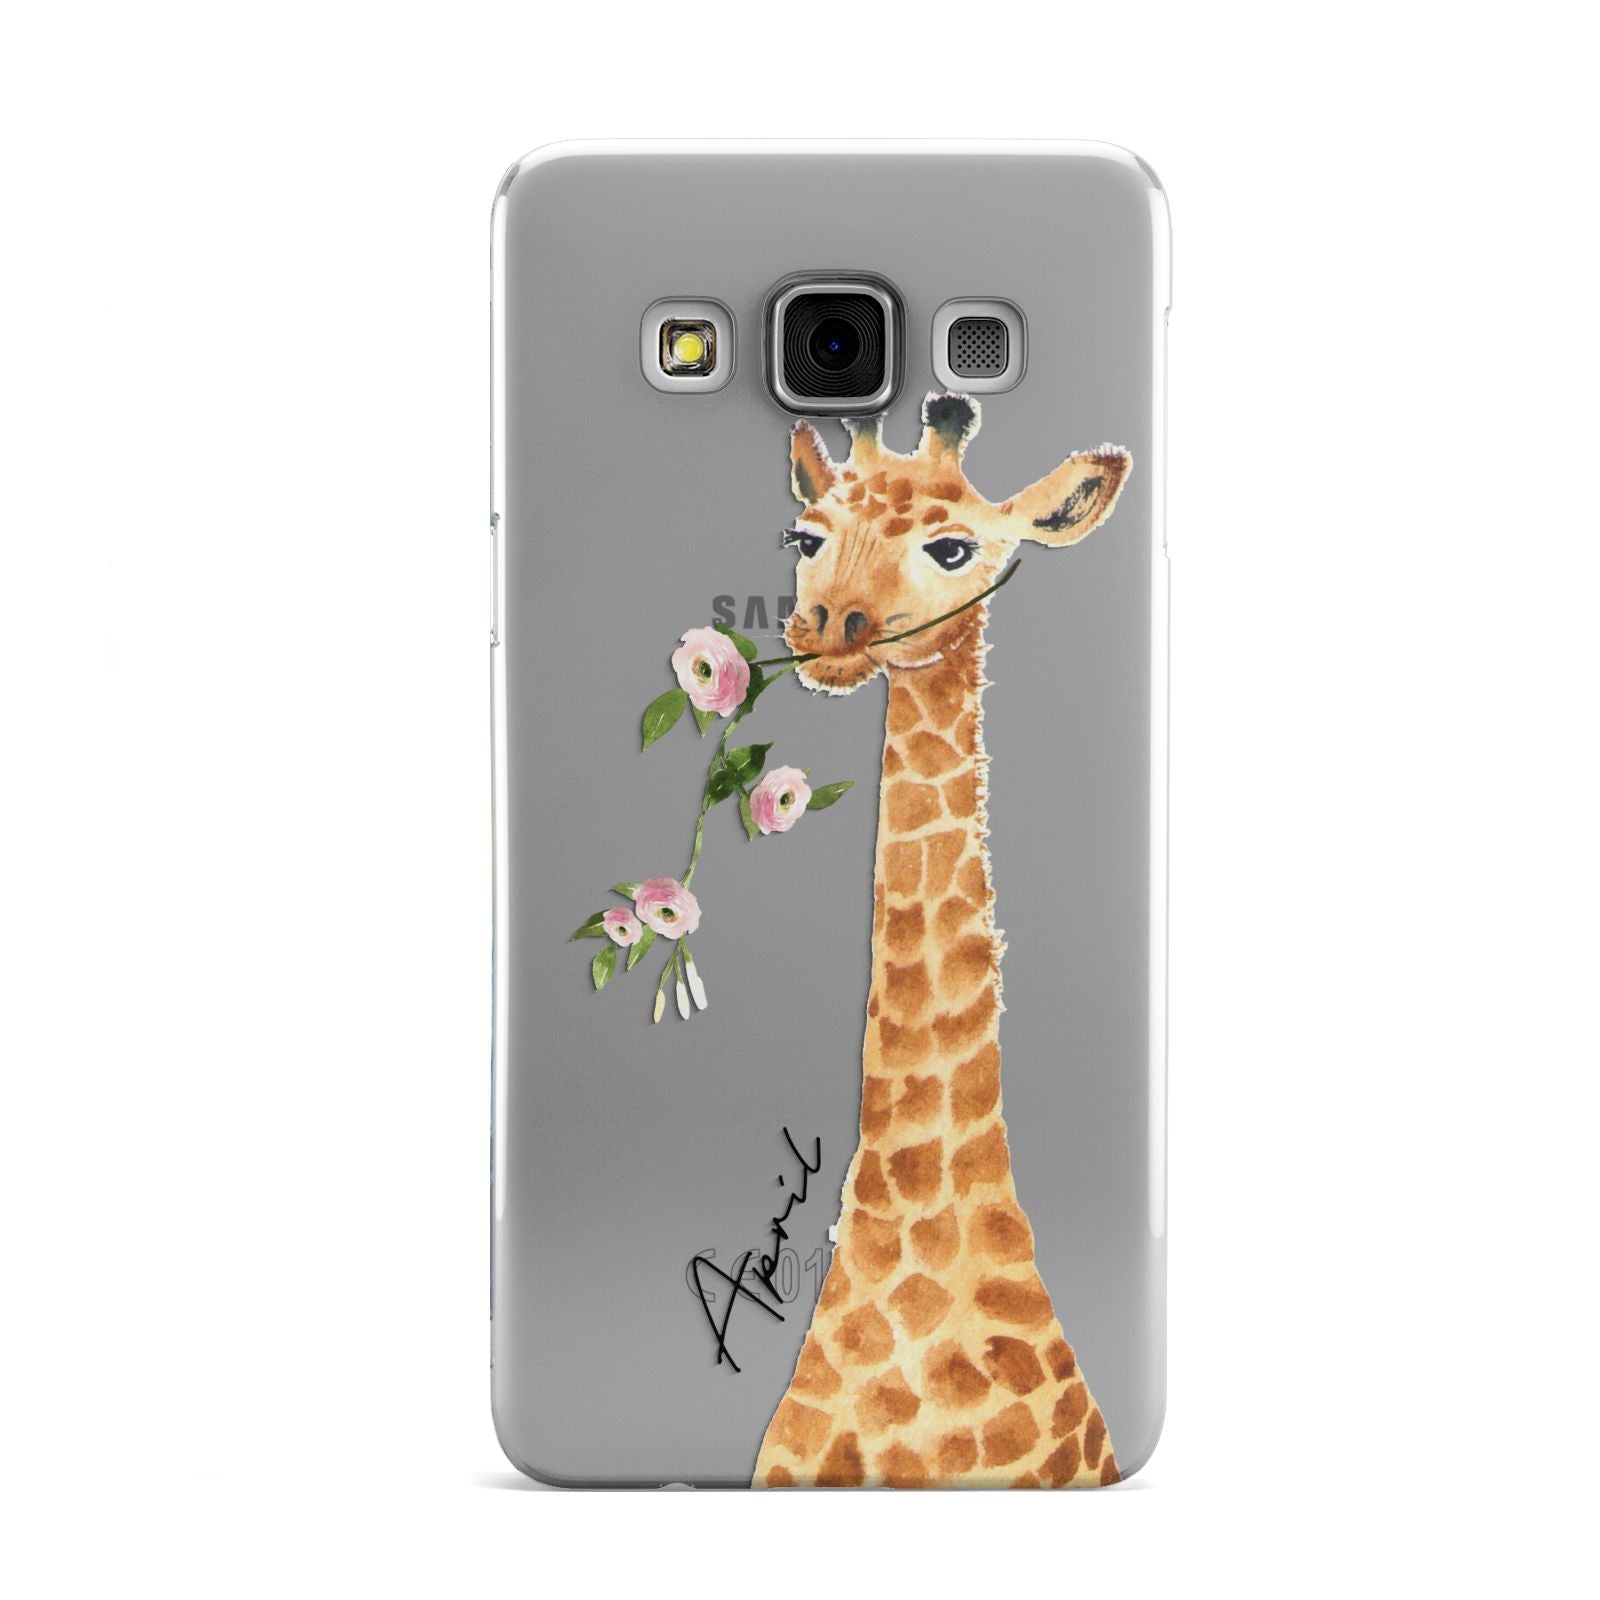 Personalised Giraffe with Name Samsung Galaxy A3 Case